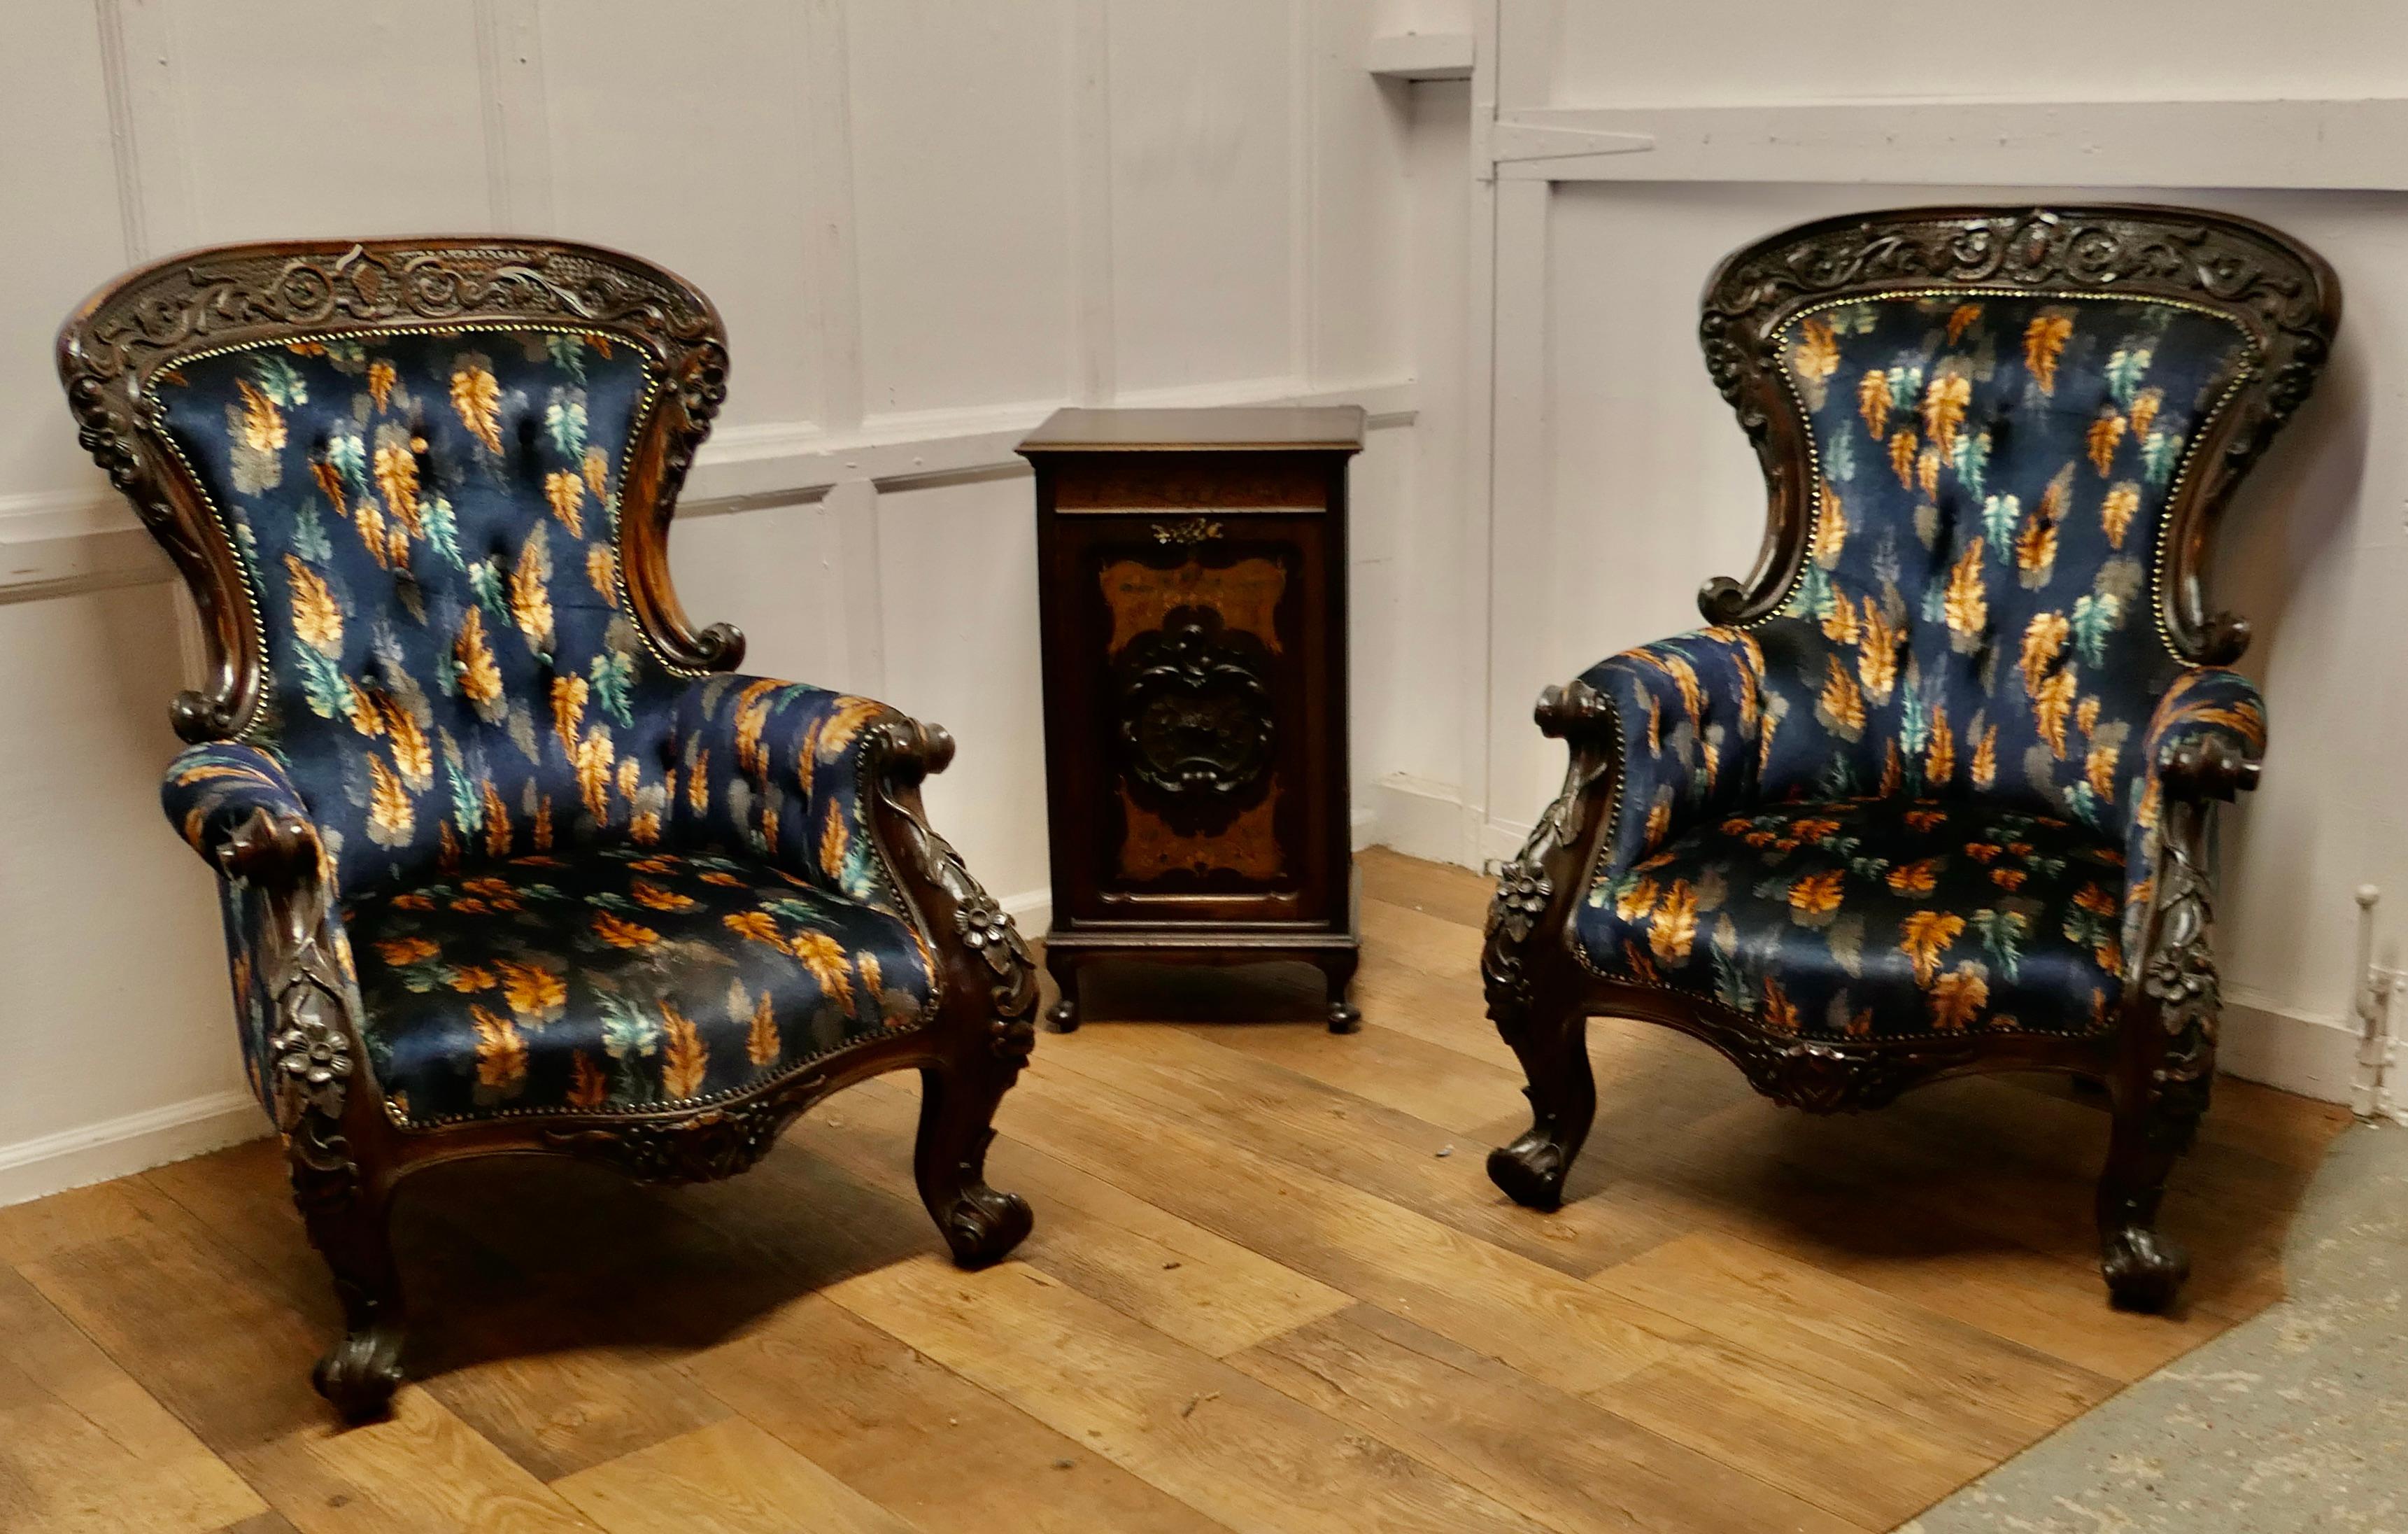 A Pair of Large Franco Chinese Carved Salon Chairs

A Pair of Superb Large Very Comfortable Salon Chairs
These chairs date from the late 19th century, the are profusely carved, mostly on a floral and leaf design with central shields
The chairs have